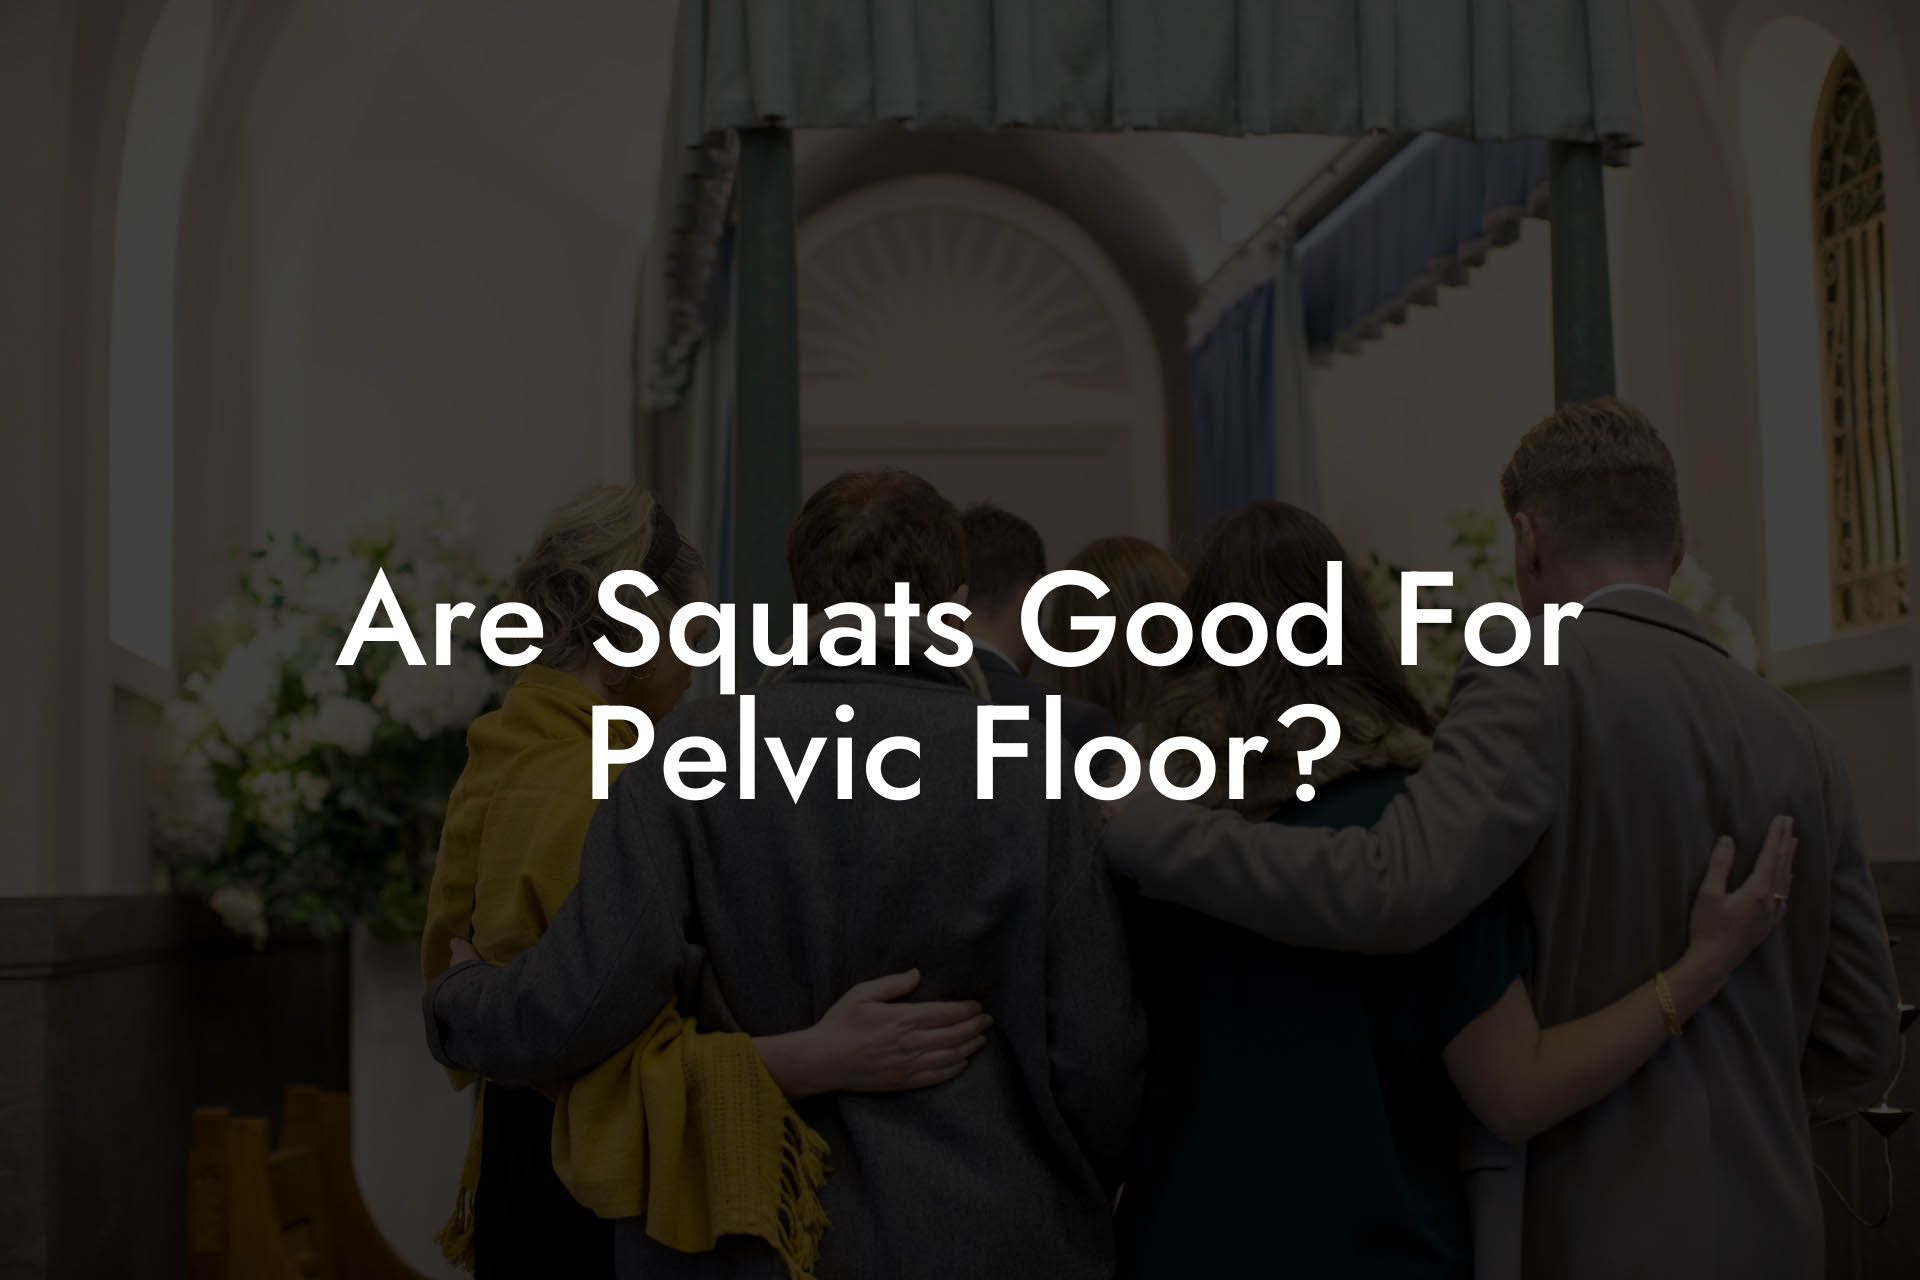 Are Squats Good For Pelvic Floor?